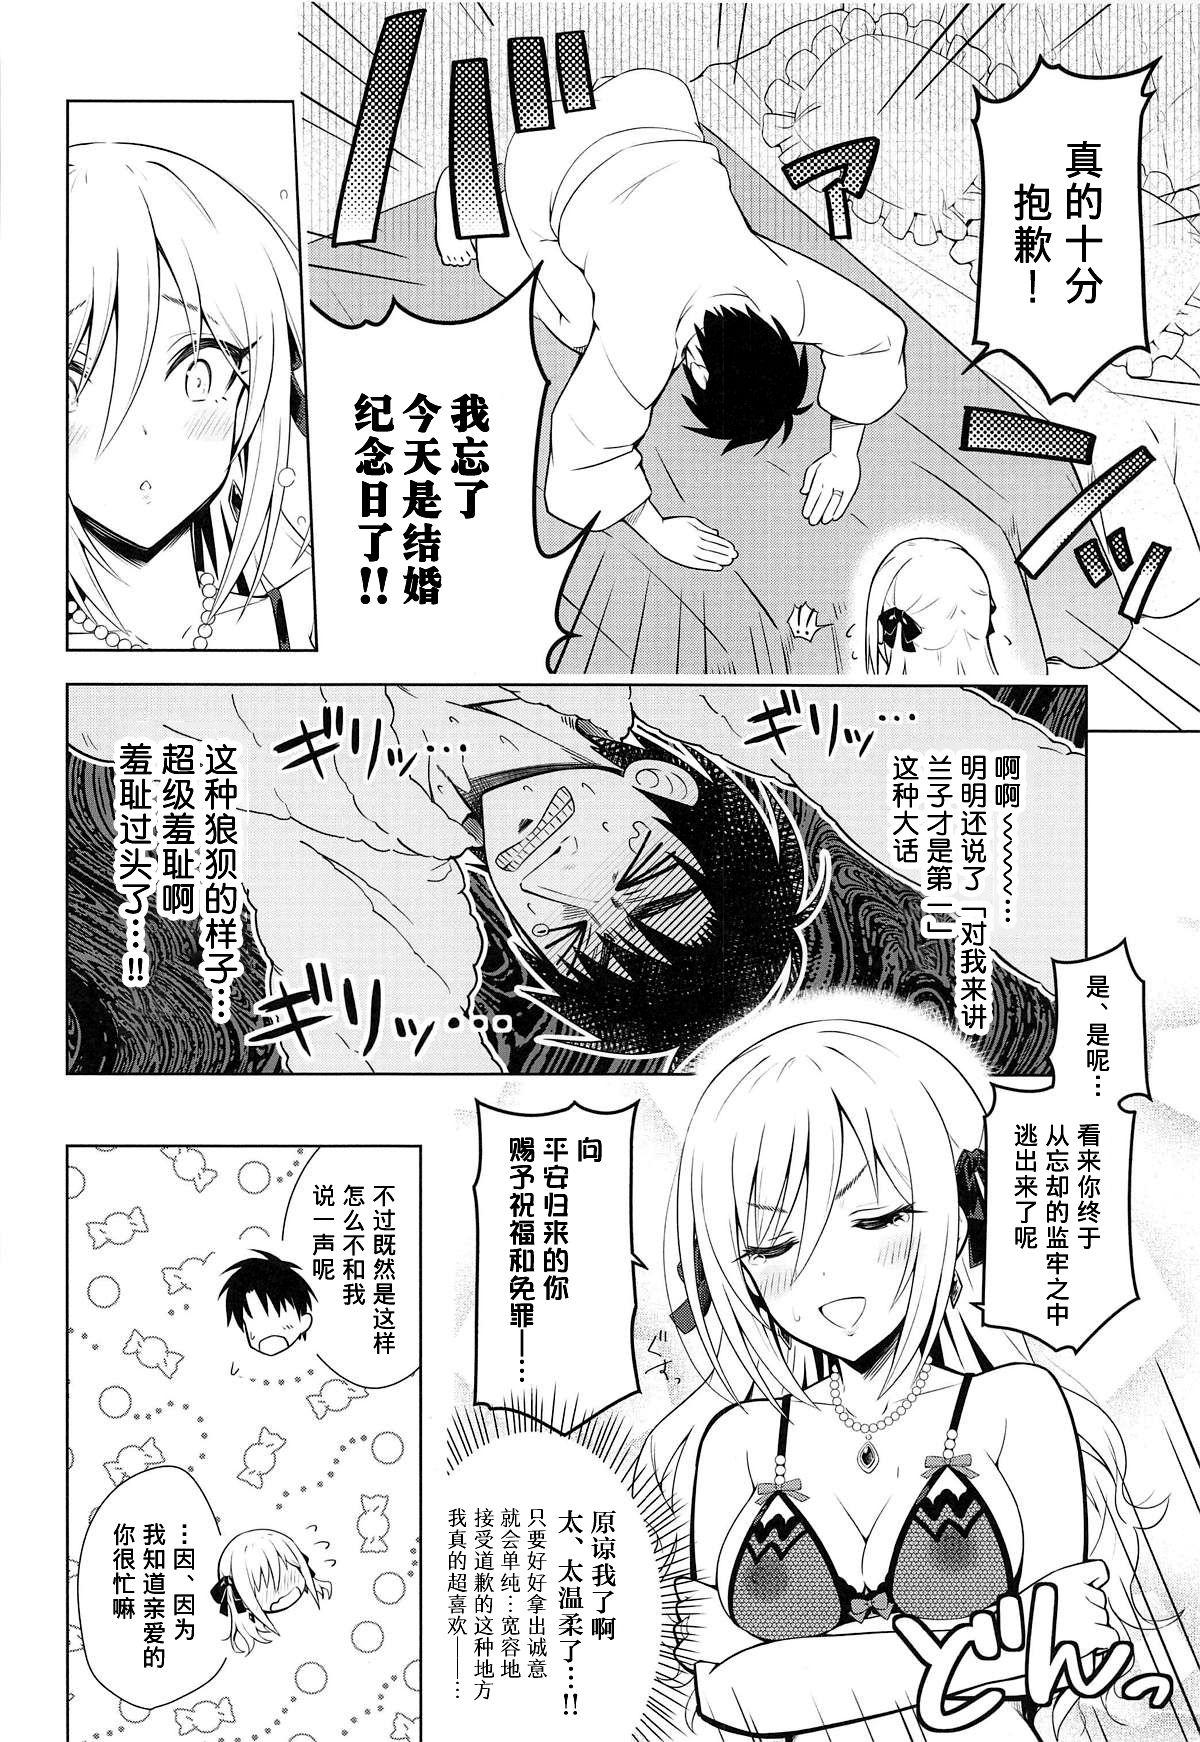 Thief MIRACH - The idolmaster Girl On Girl - Page 13